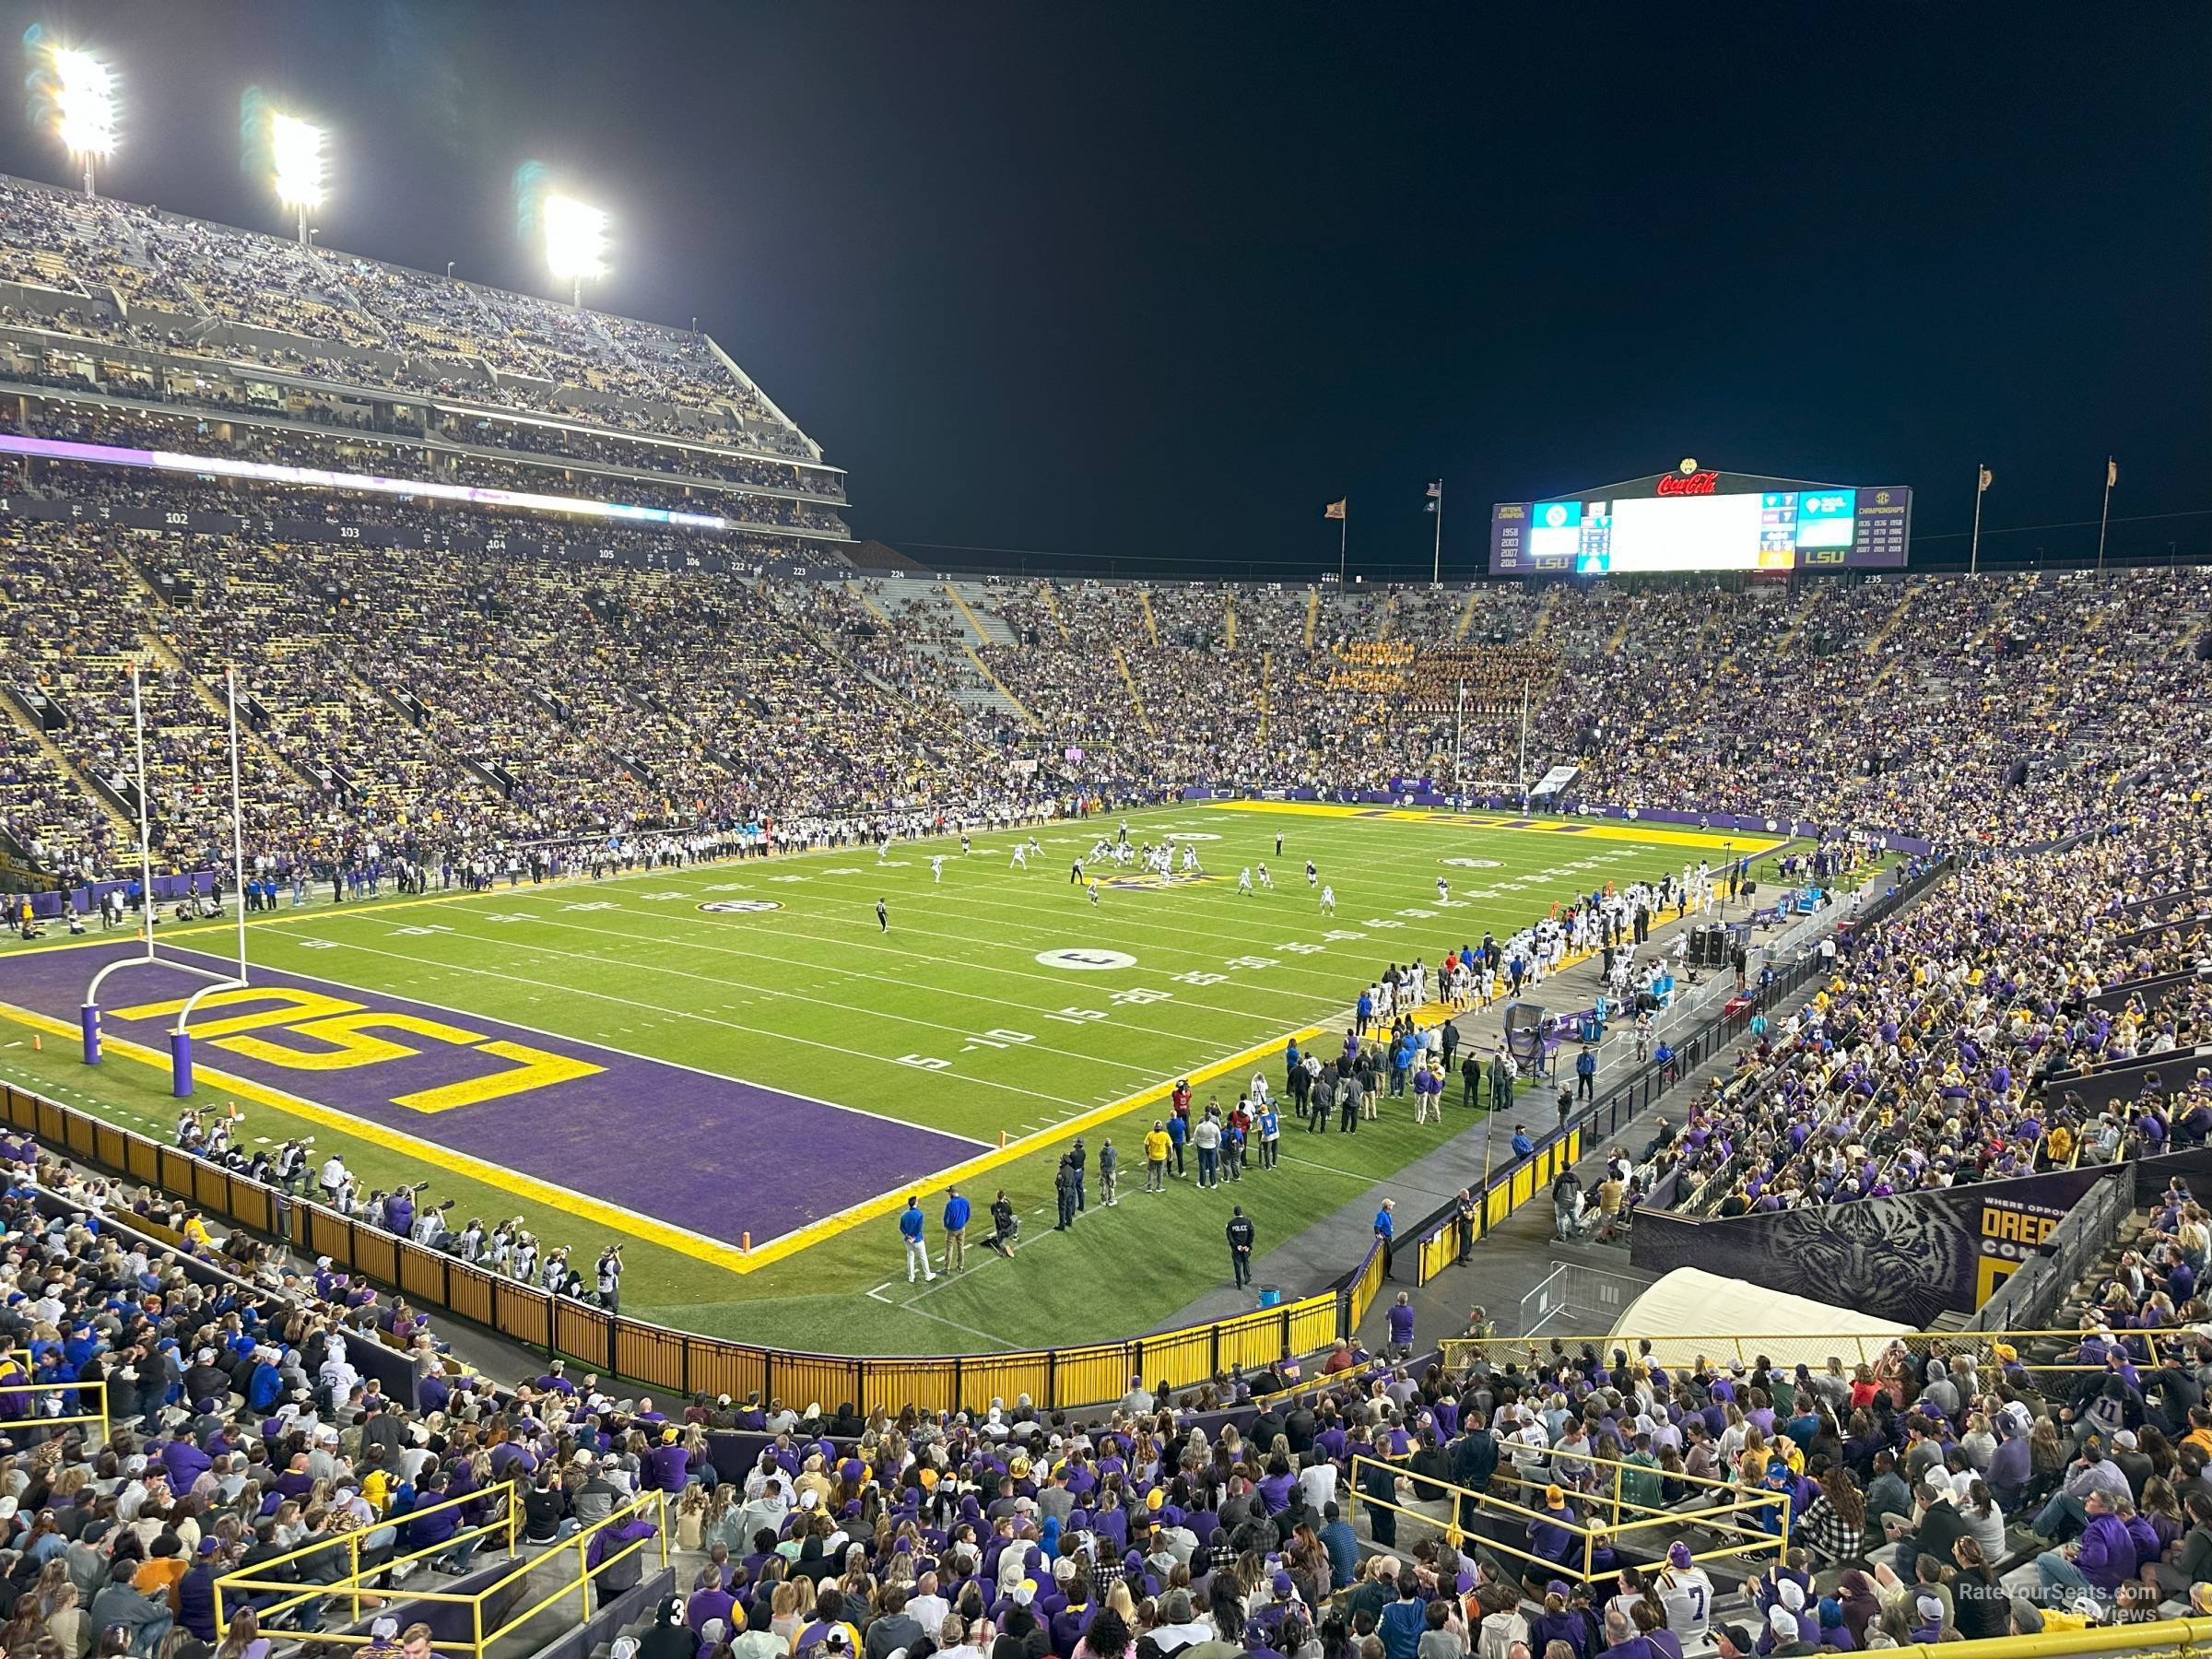 section 413, row 5 seat view  - tiger stadium